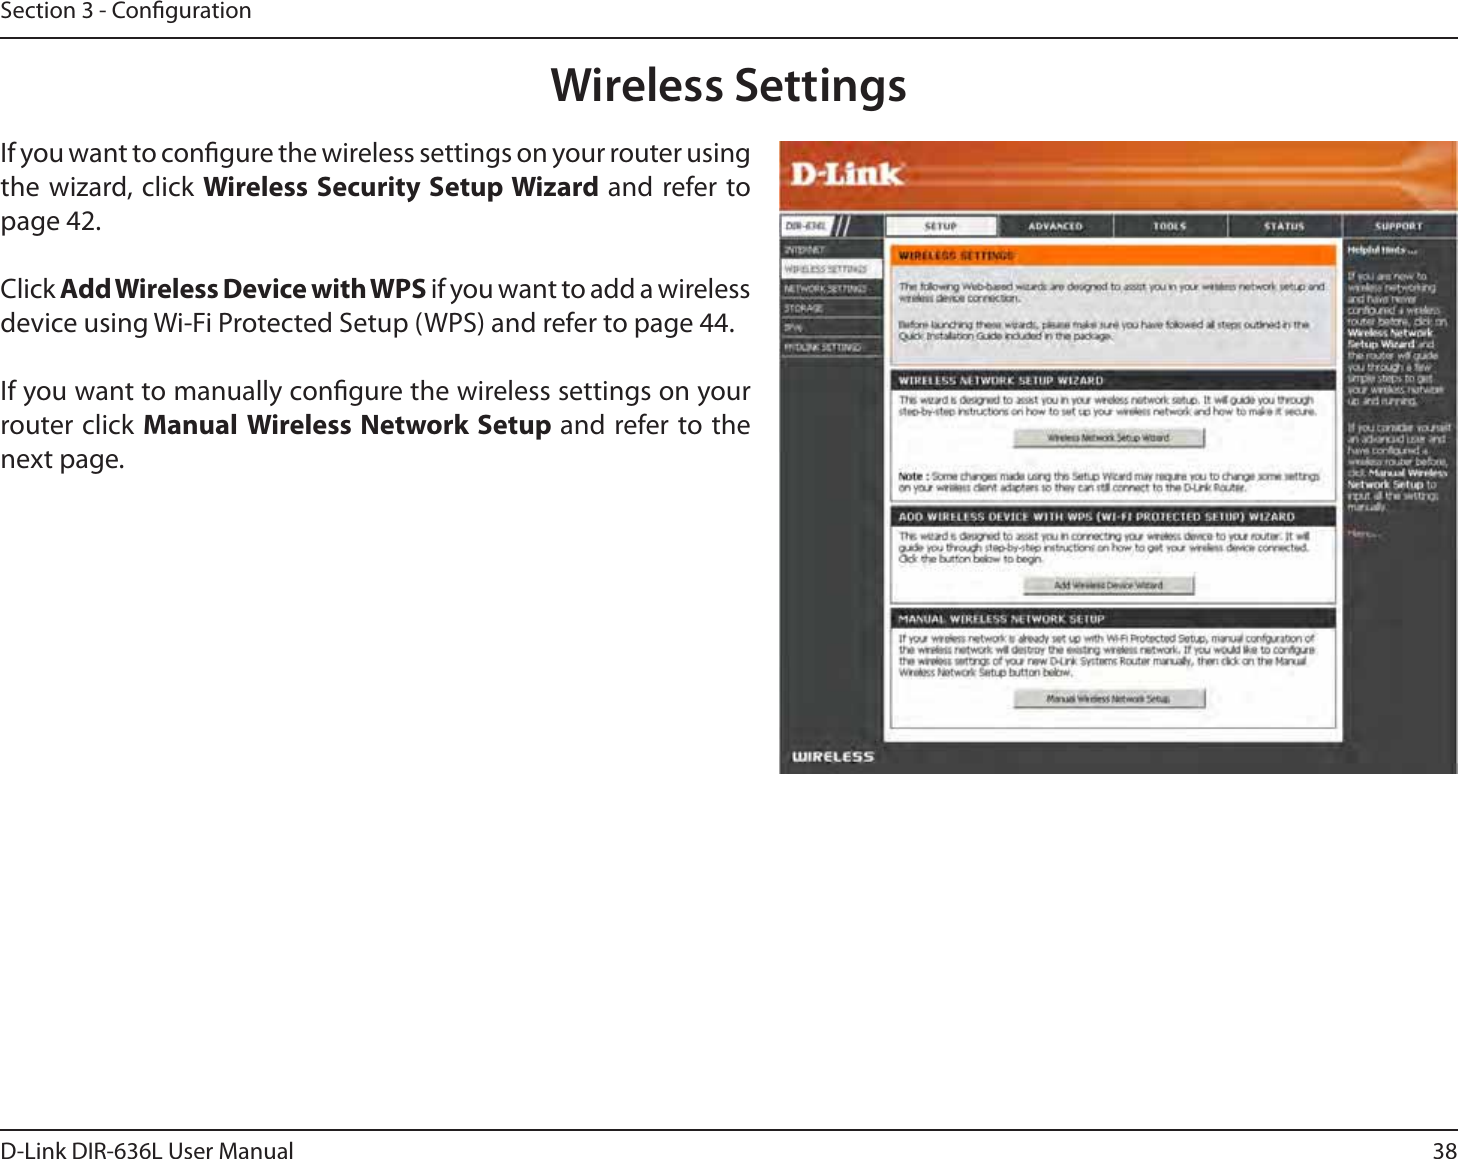 38D-Link DIR-636L User ManualSection 3 - CongurationWireless SettingsIf you want to congure the wireless settings on your router using the wizard, click Wireless Security Setup Wizard and refer to page 42.Click Add Wireless Device with WPS if you want to add a wireless device using Wi-Fi Protected Setup (WPS) and refer to page 44.If you want to manually congure the wireless settings on your router click Manual Wireless Network Setup and refer to the next page.